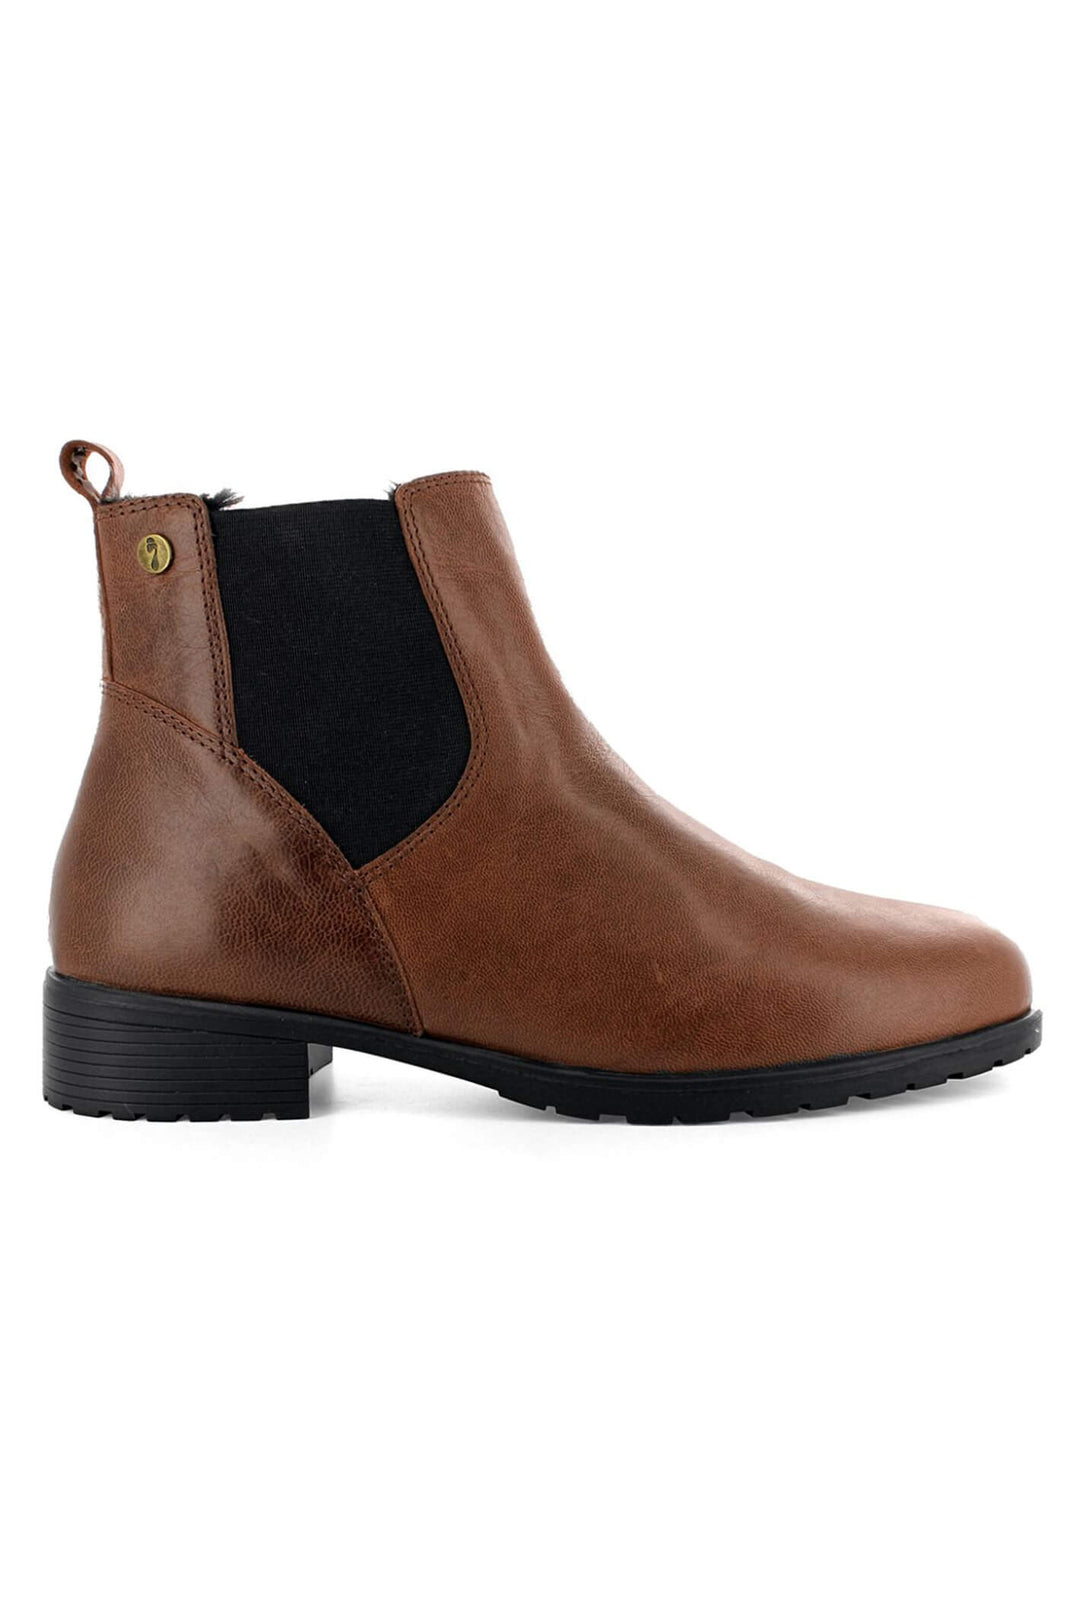 Strive Windsor Tan Boots - Shirley Allum Boutique